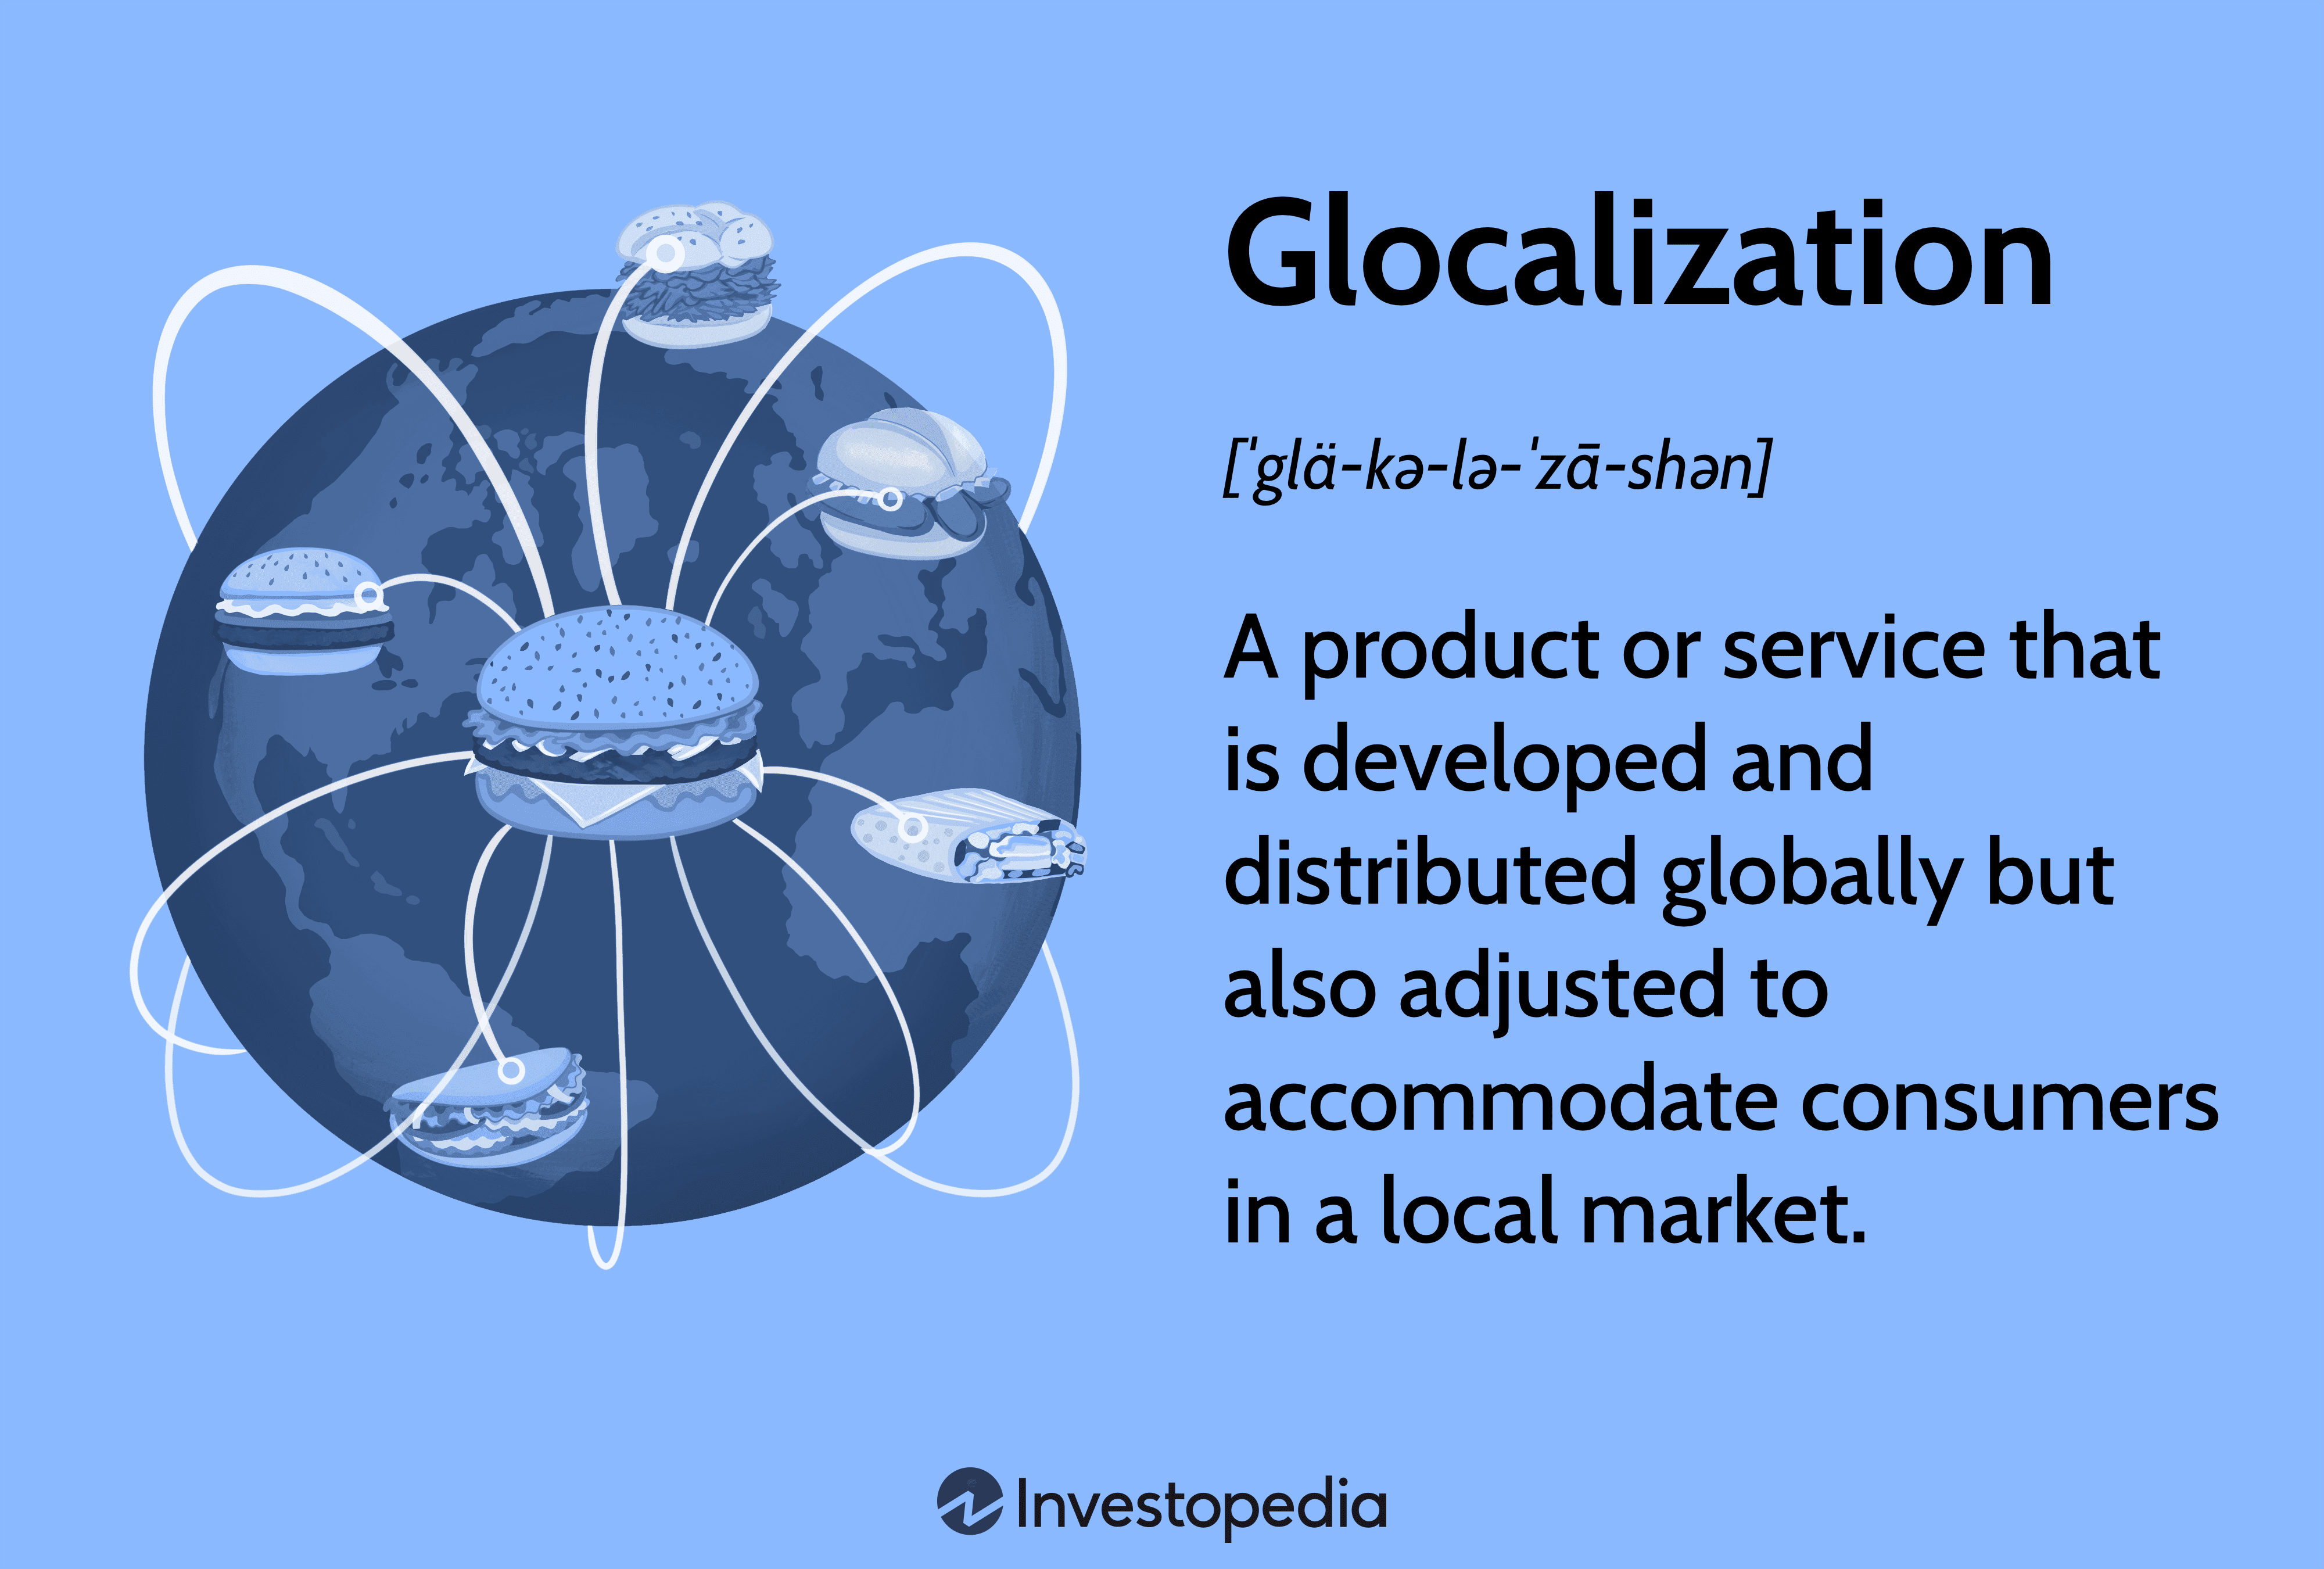 Glocalization: A product or service that is developed and distributed globally but also adjusted to accommodate consumers in a local market.